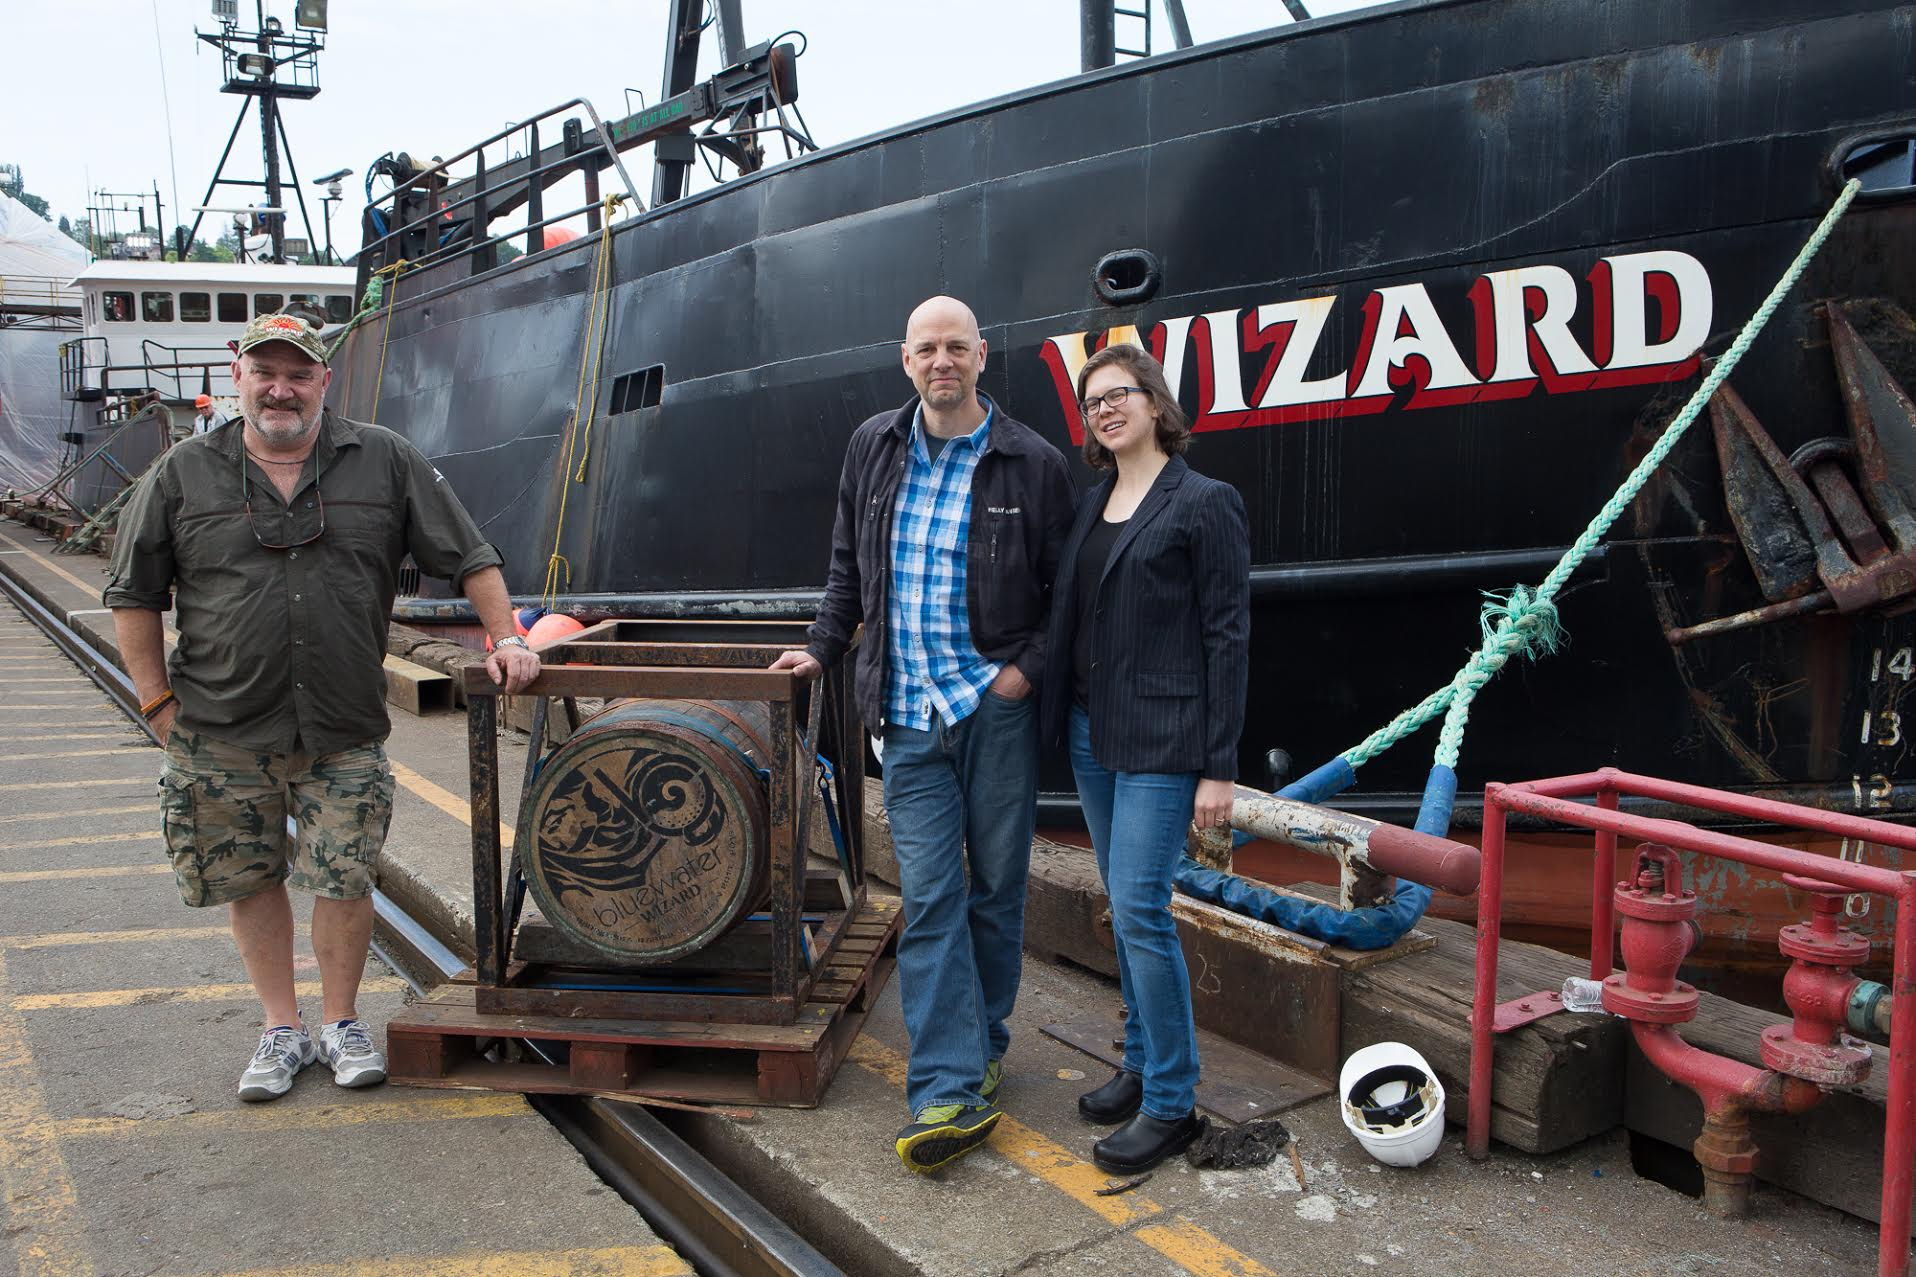 Capt. Keith Colburn (left) stands Bluewater Organic Distilling owner John Lundin and his wife, Jessica, beside the barrel of akvavit that rode on the F/V Wizard during the crabbing season in the Bering Sea.